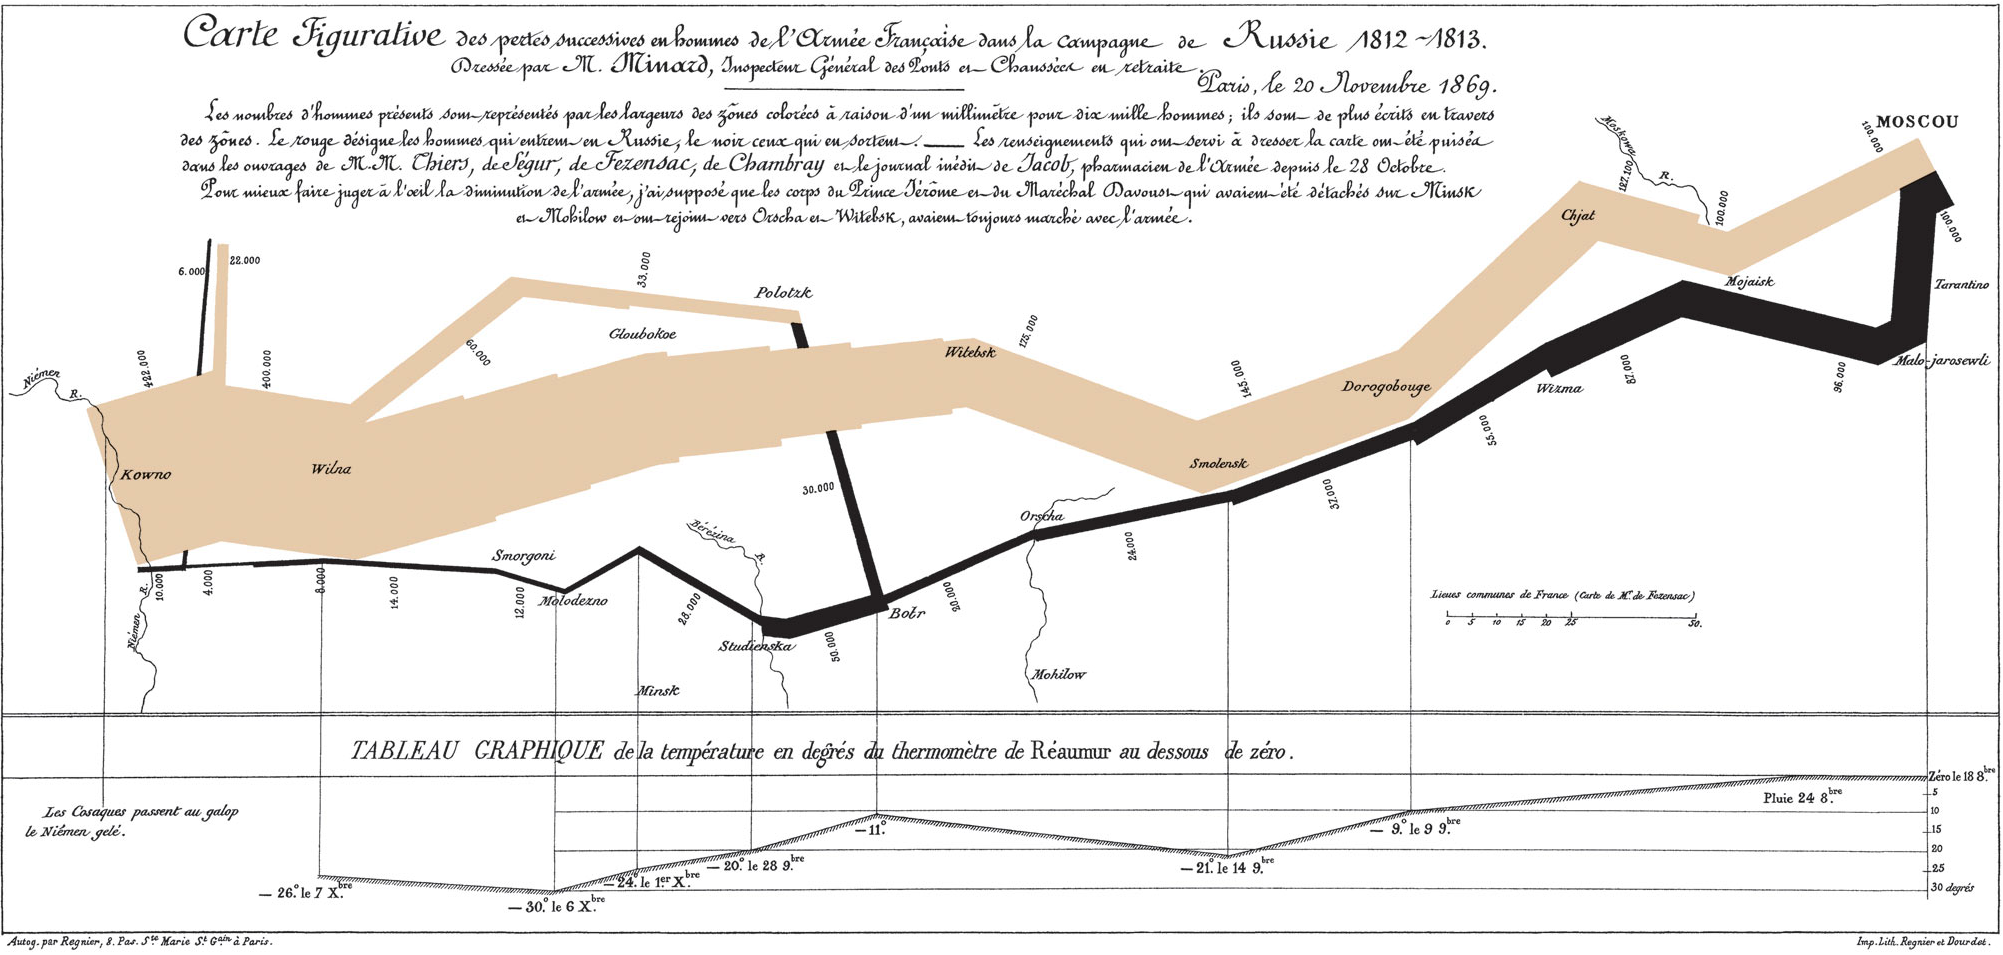 Charles Minard's 1869 map of “the successive losses in men of the French Army in the Russian campaign 1812–1813”. Source: Wikimedia Commons.